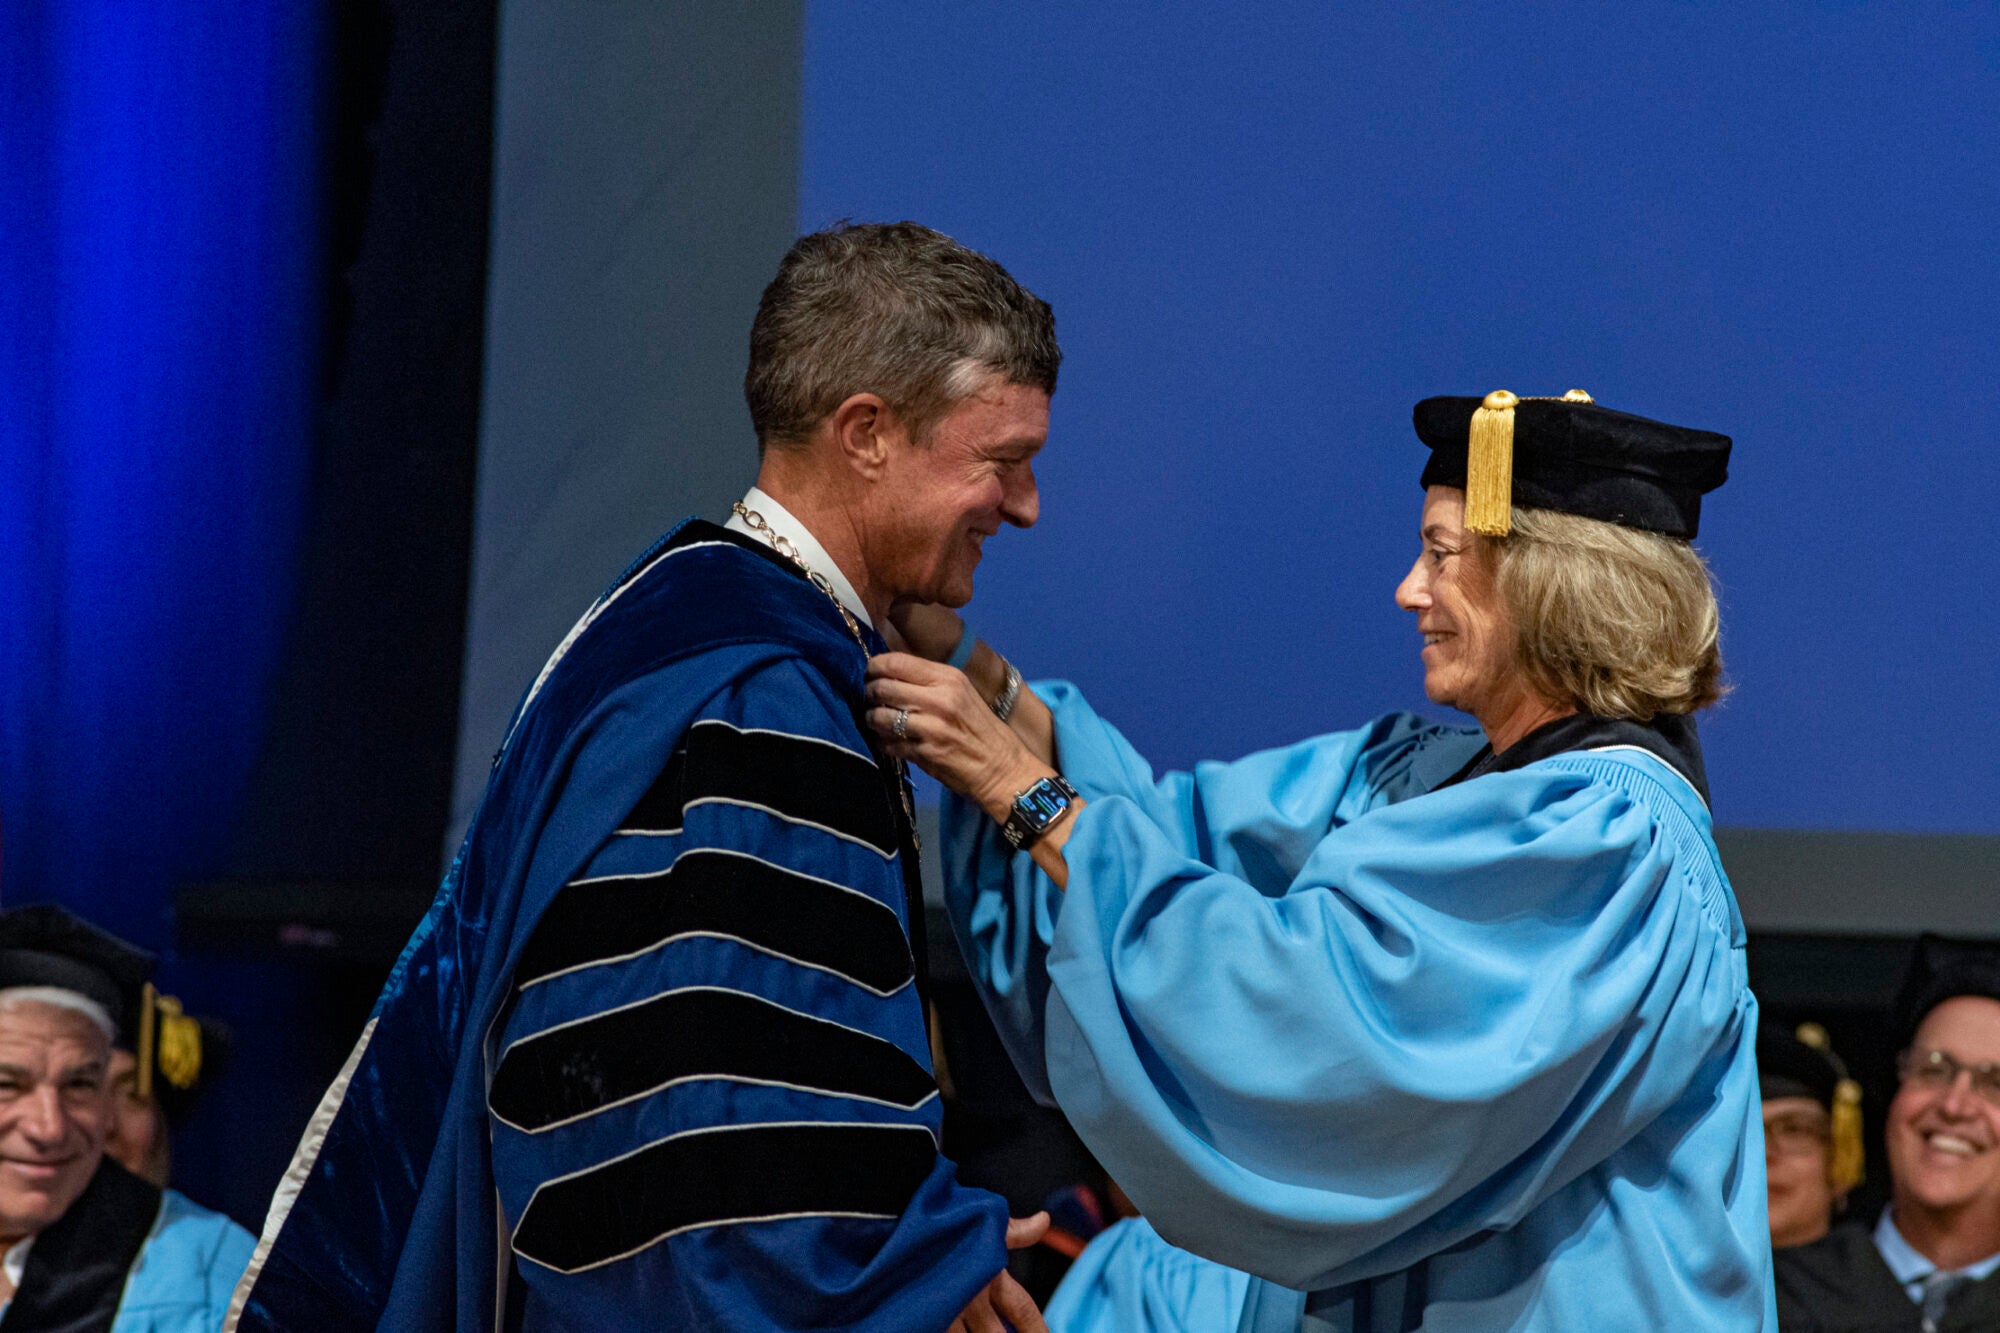 President Parlange receives the URI Presidential Medallion from Chair of the Board of Trustees Margo Cook